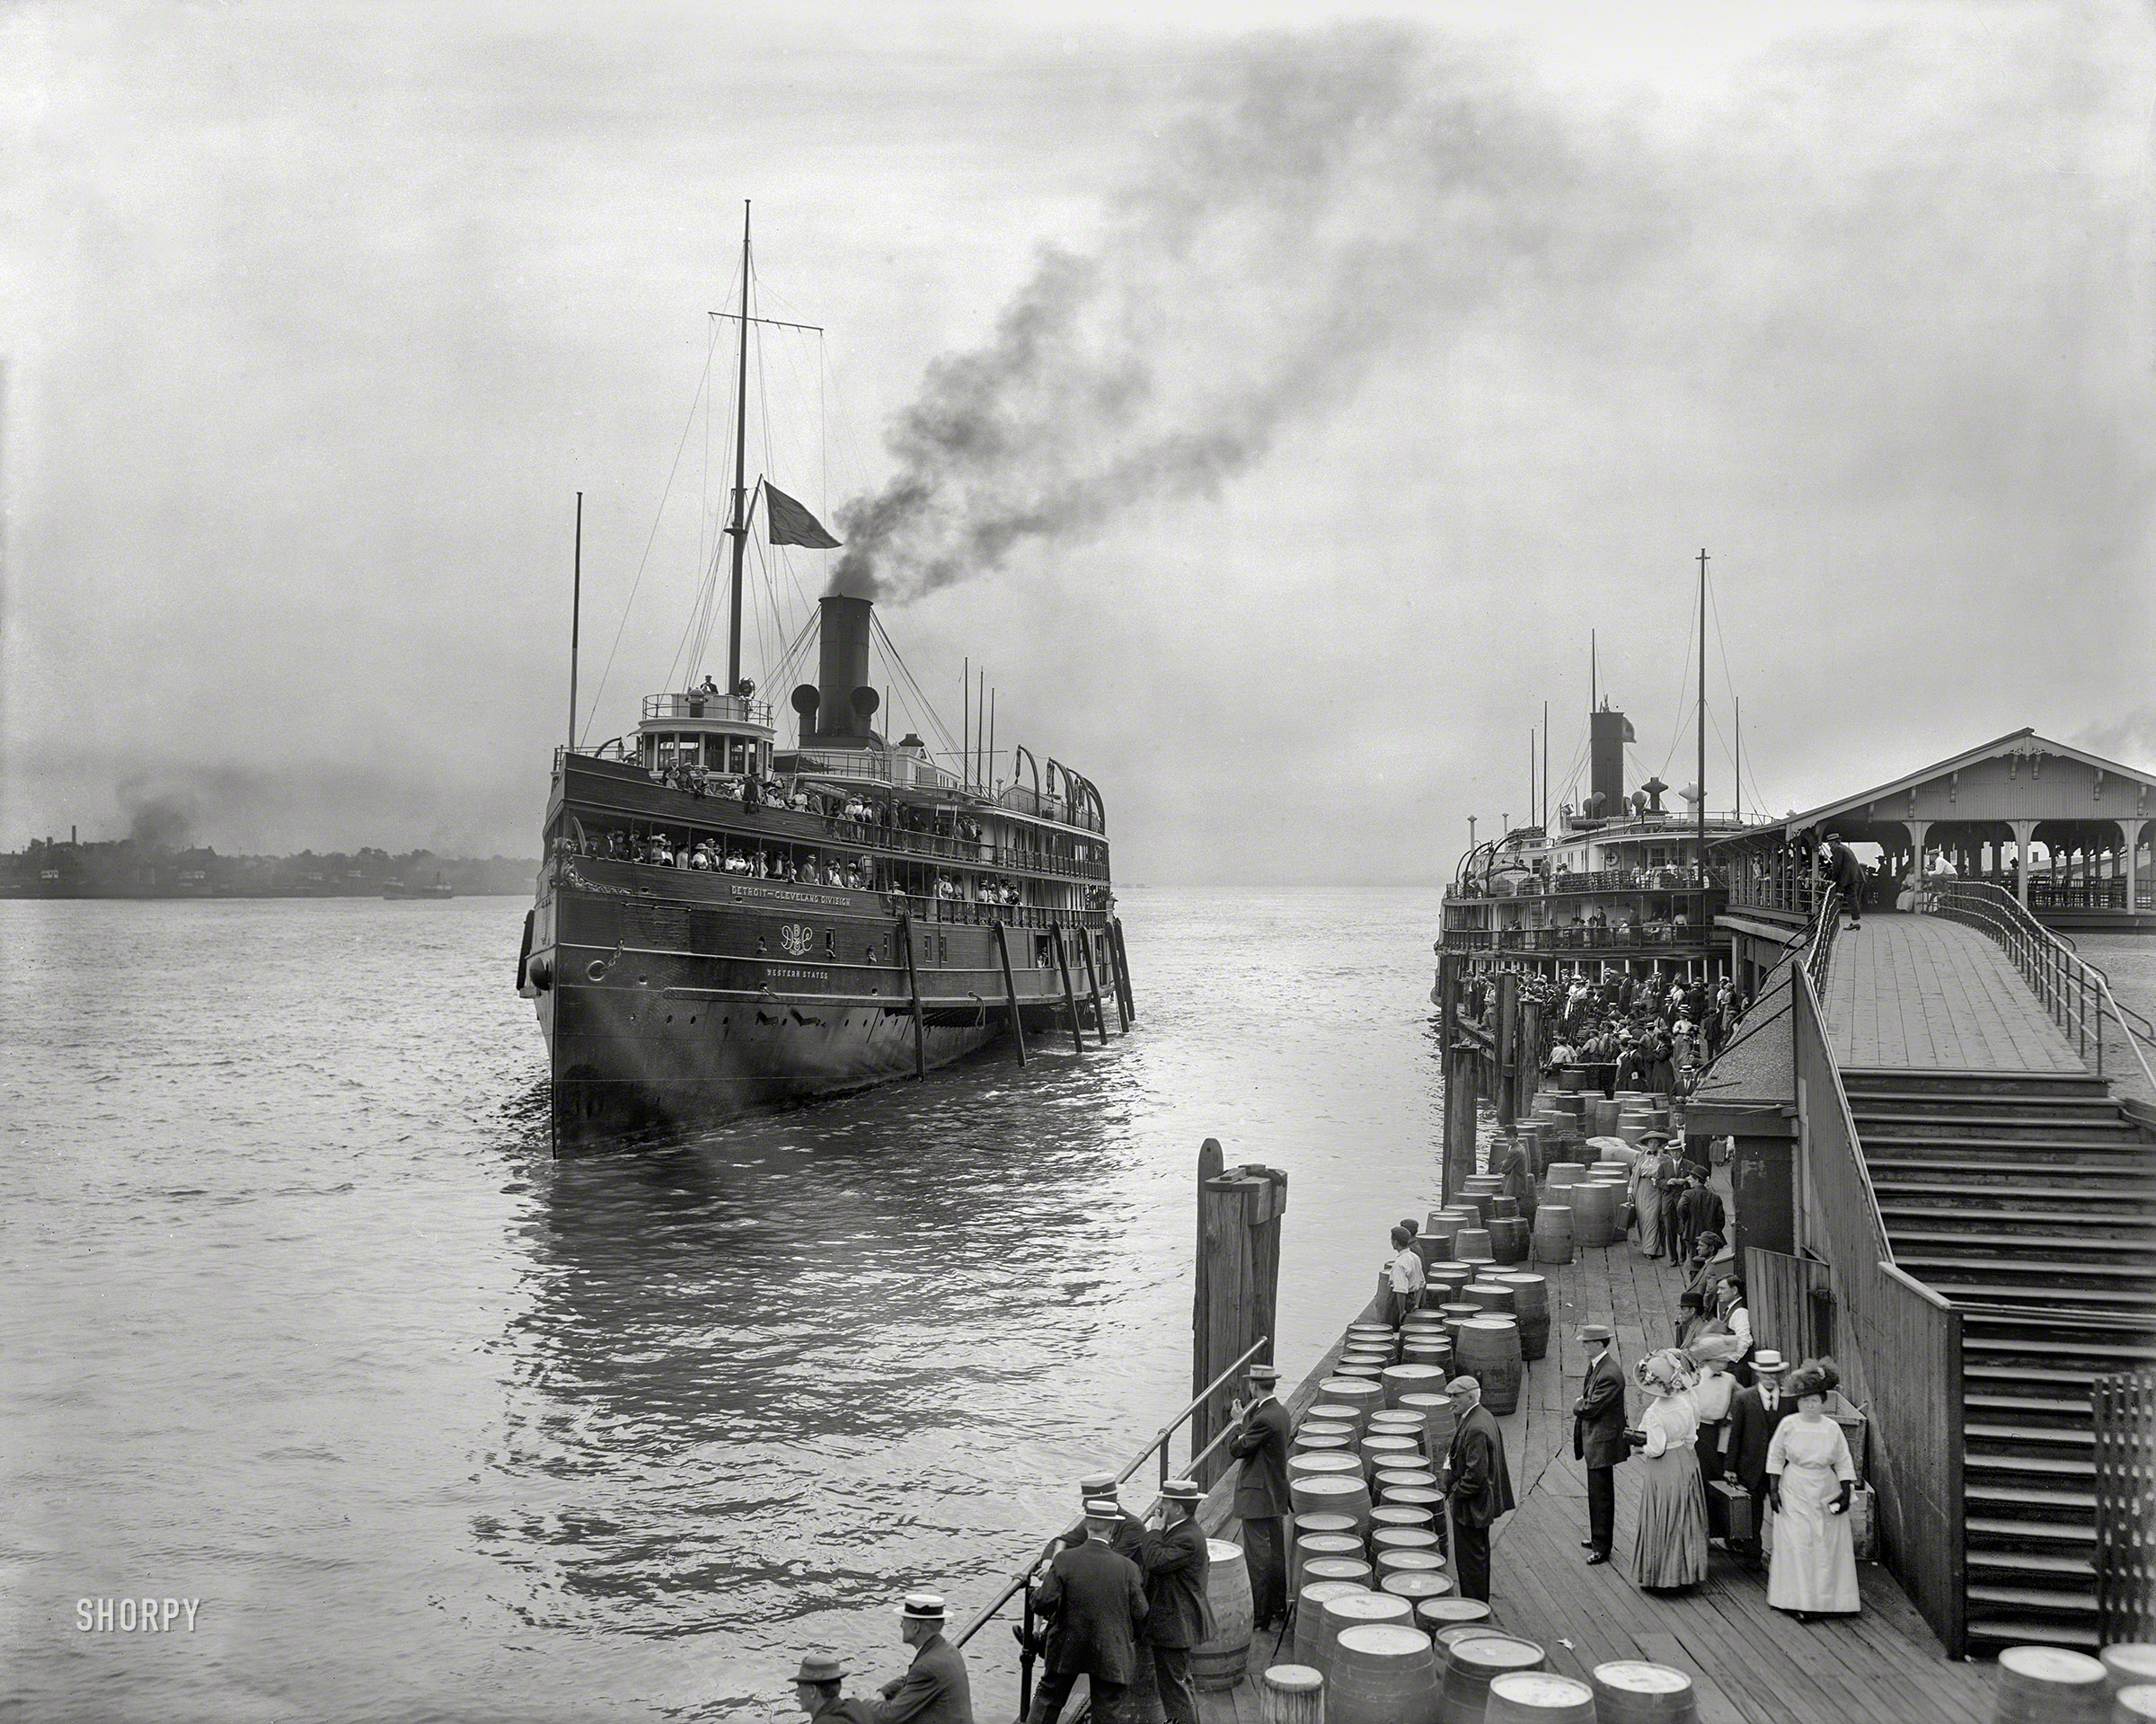 Circa 1910. "Detroit & Cleveland Navigation Line steamboats Western States and City of Mackinac." Built in 1902 and 1893 in Wyandotte, Michigan.  View full size.